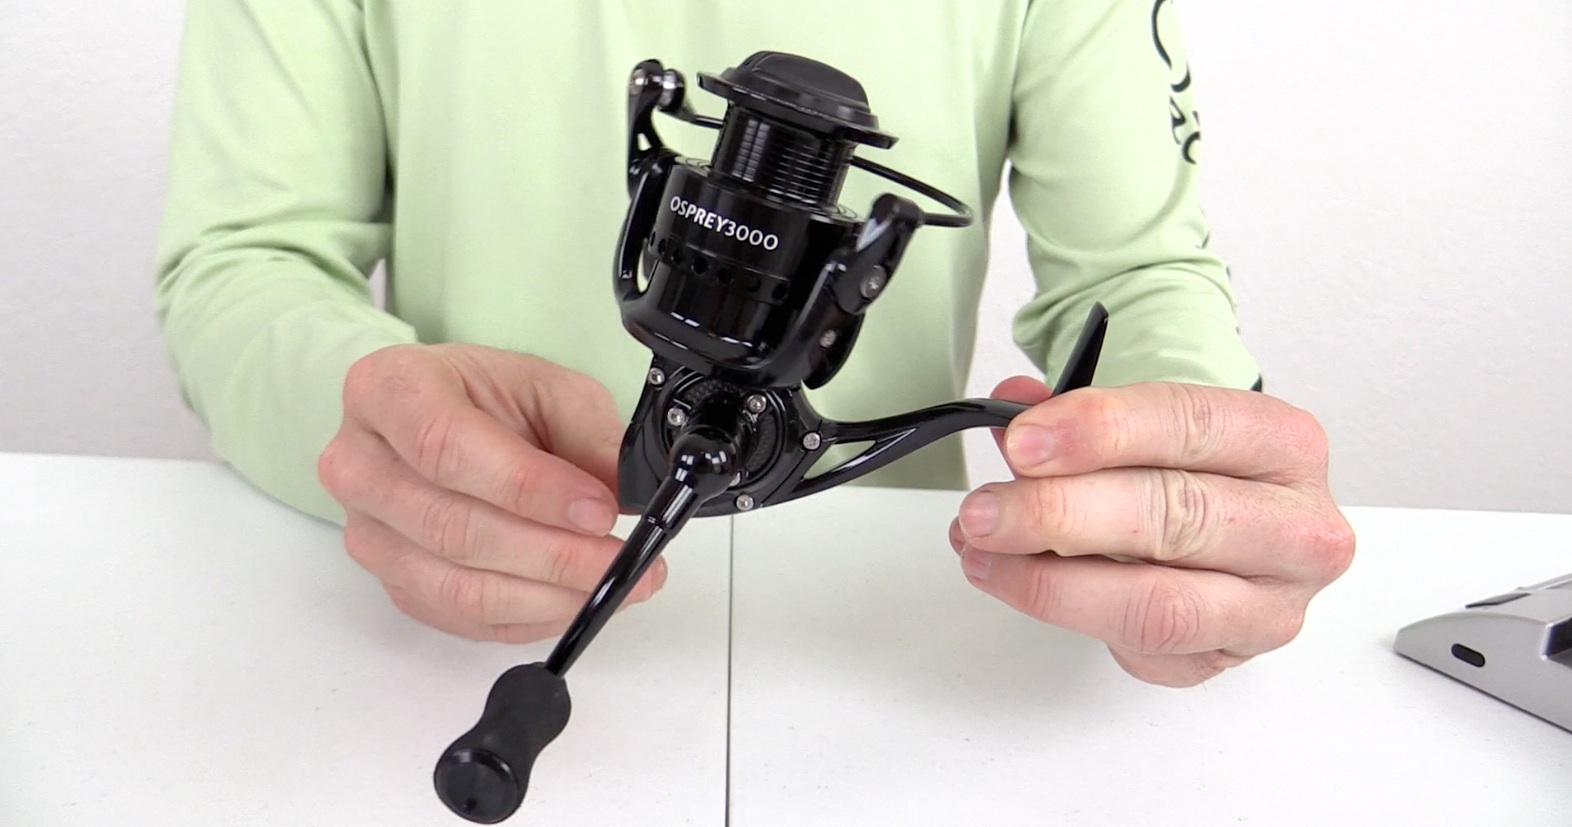 Florida Fishing Company's Osprey 3000 Reel Review [Performance Analysis]